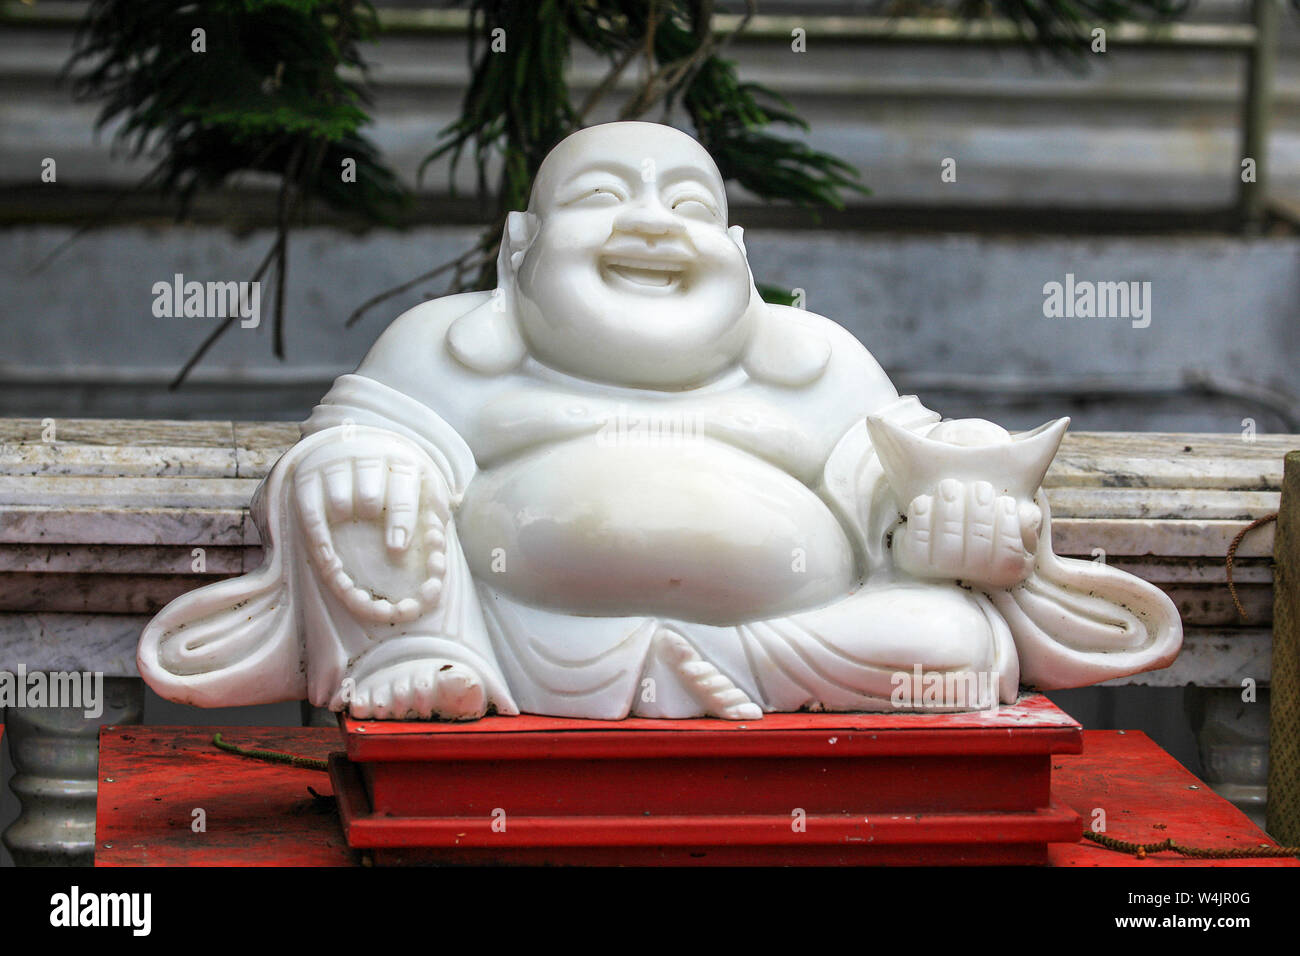 A white statue of Mudai, The Laughing Buddha, sits on a red platform at a temple or wat in Chiang Mai, Northern Thailand. Stock Photo